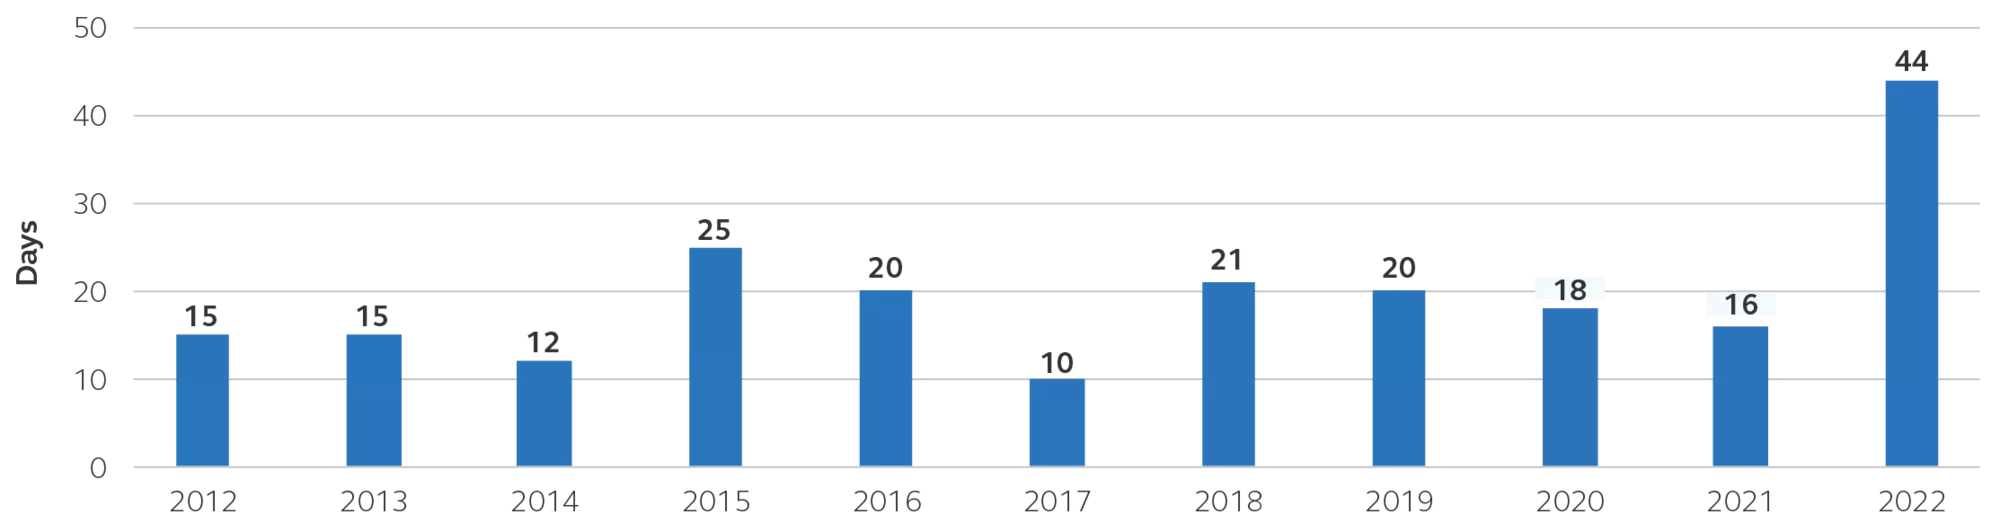 Bar graph showing number of days with no supply issuance from 2012-2022